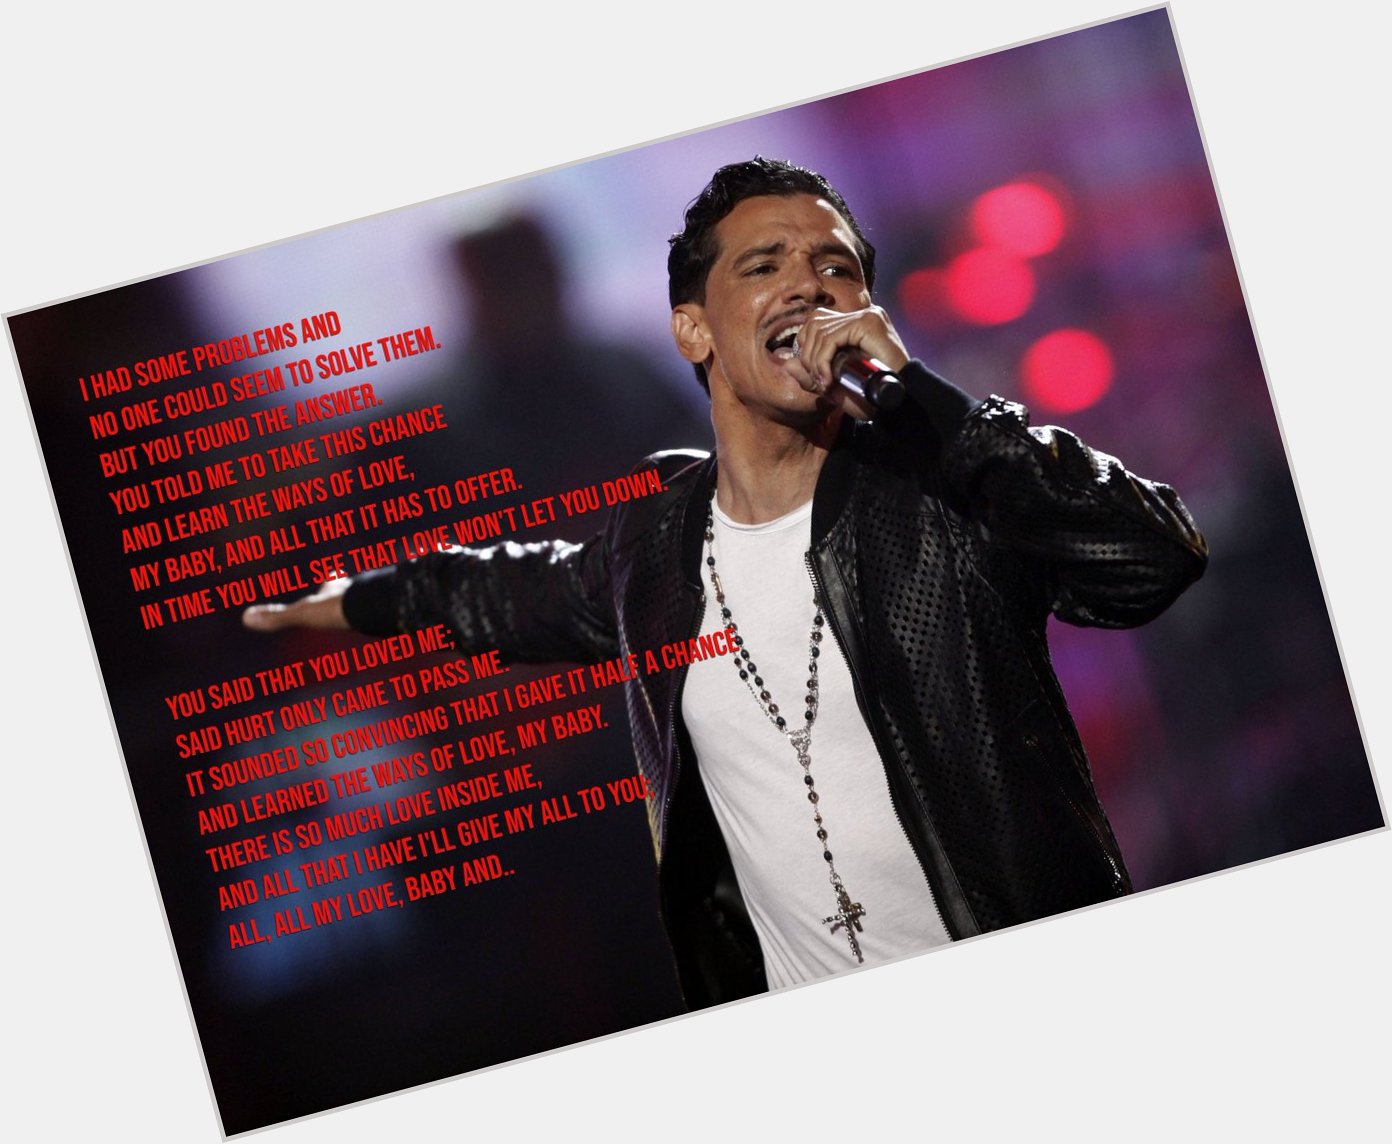  All This Love by DeBarge. Happy 60th Birthday to El DeBarge! 